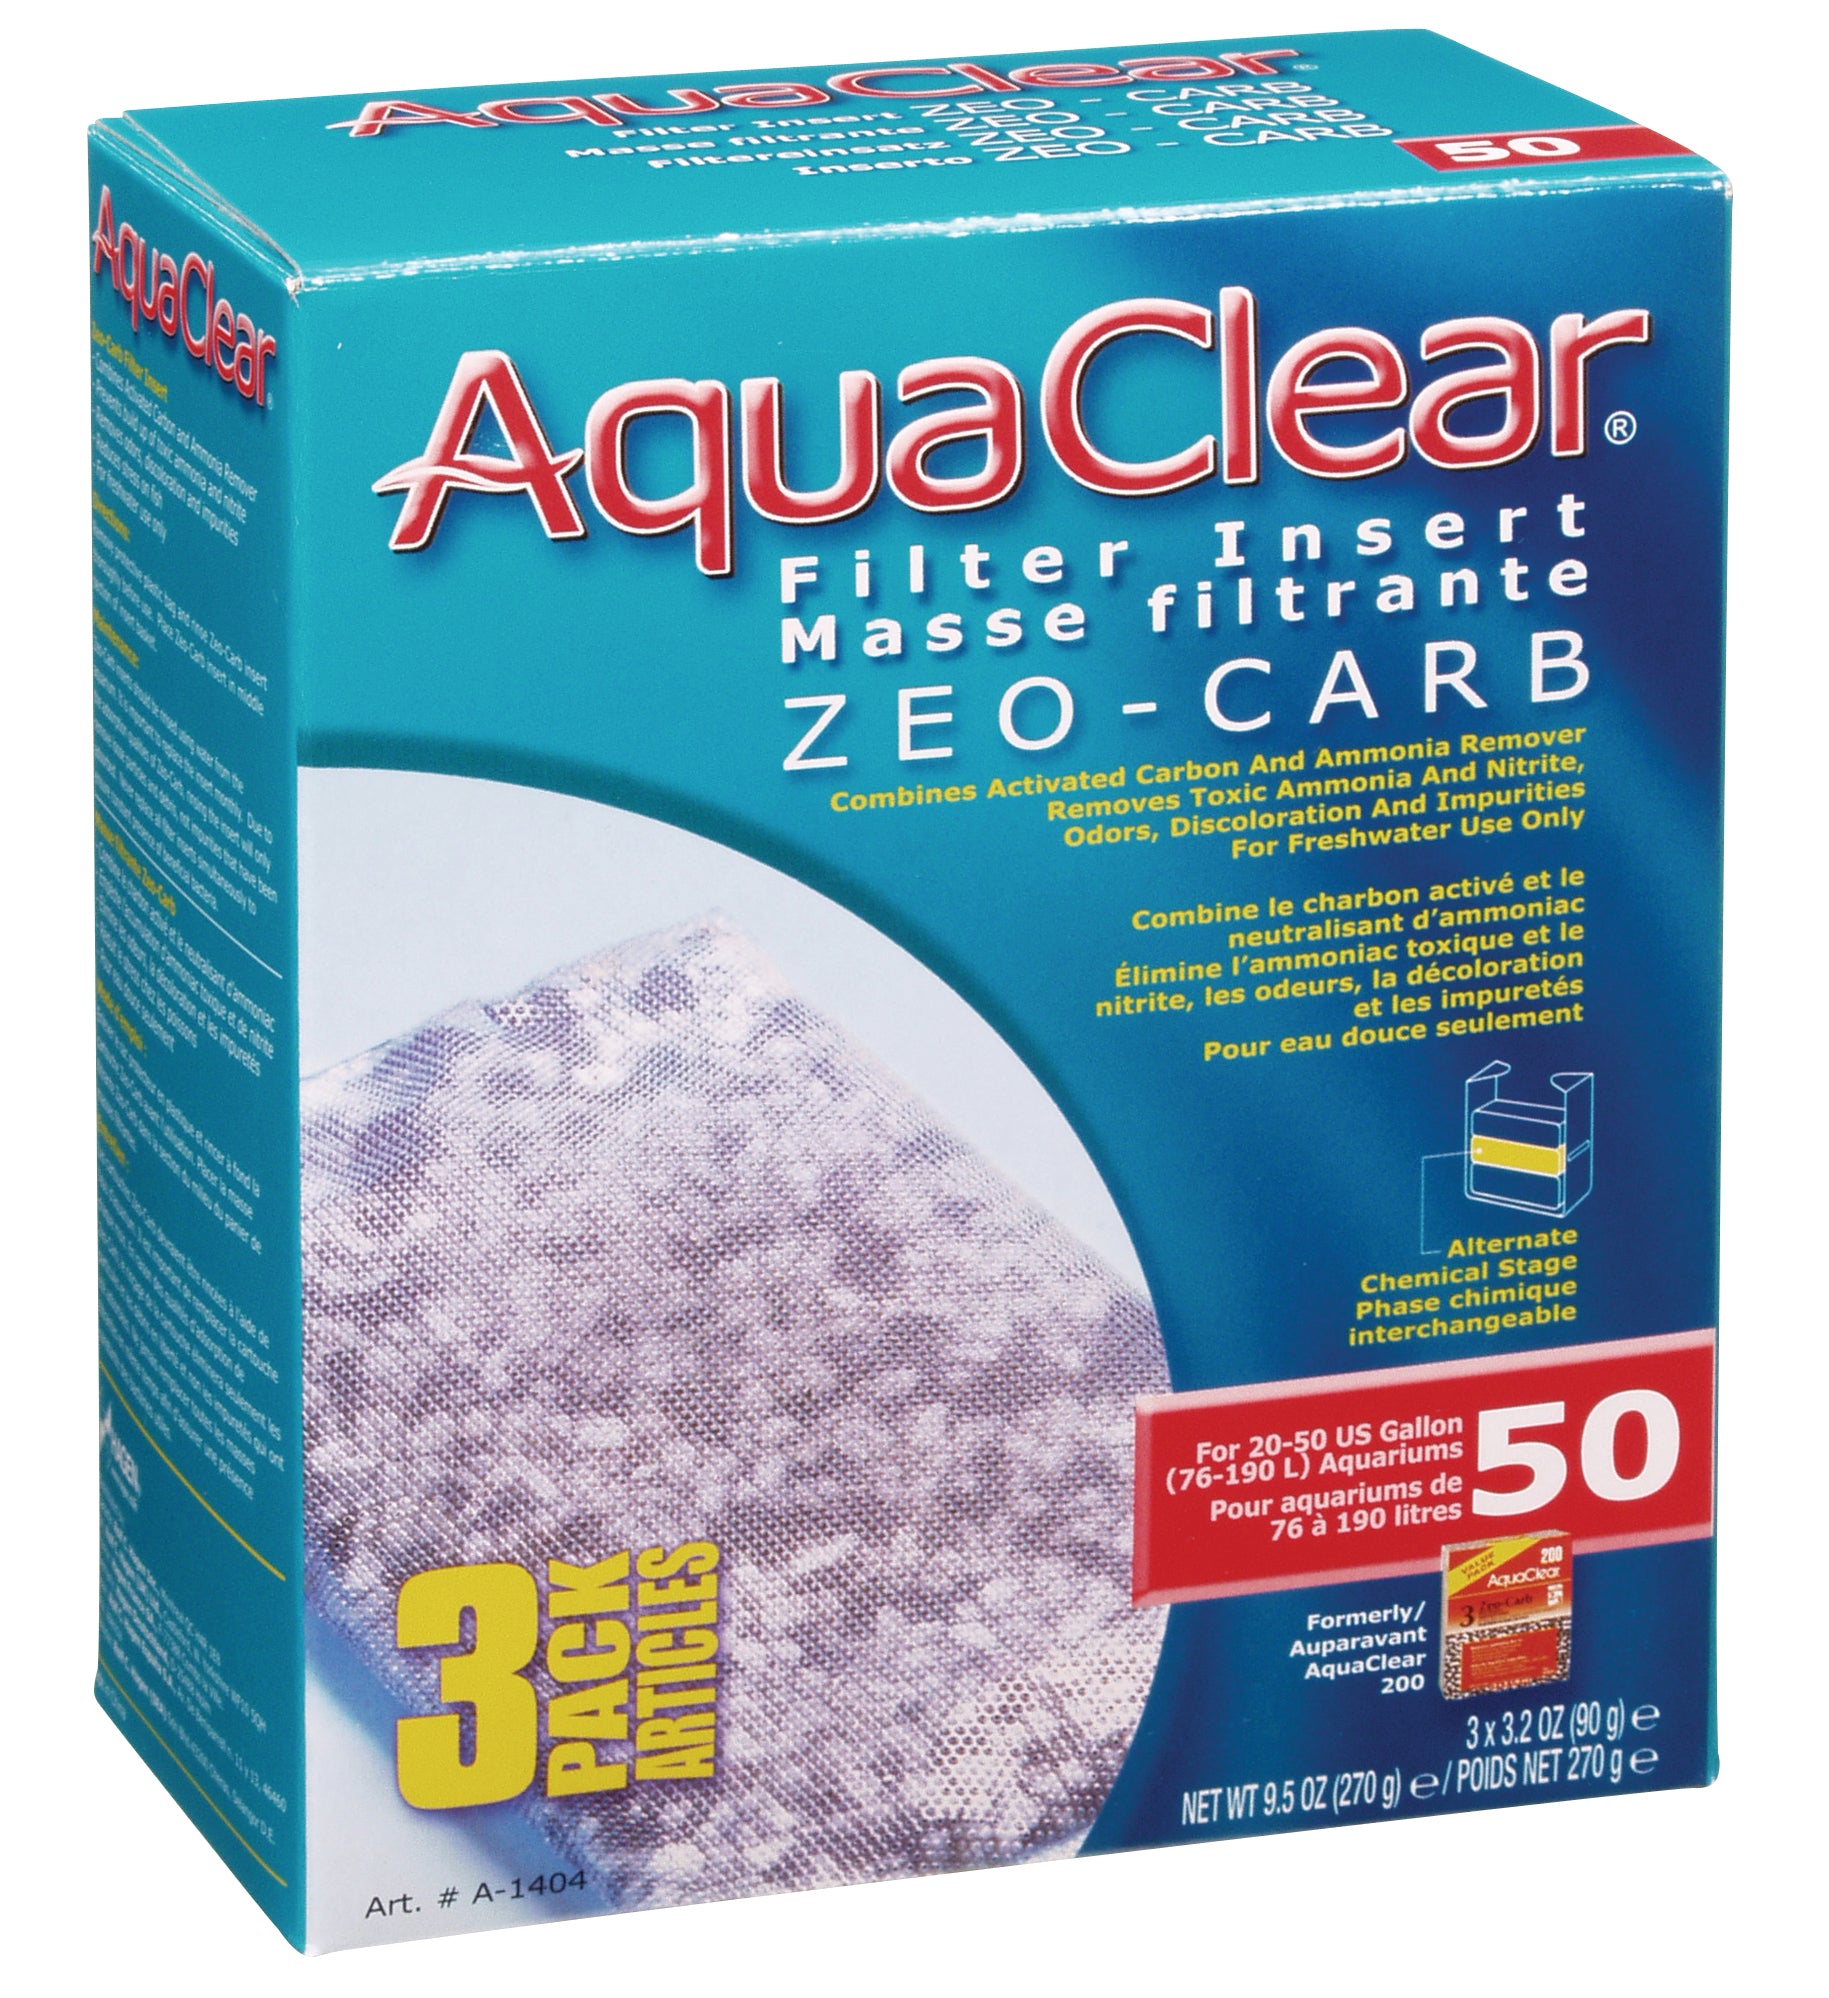 AquaClear Zeo-Carb Filter Insert (3-Pack)